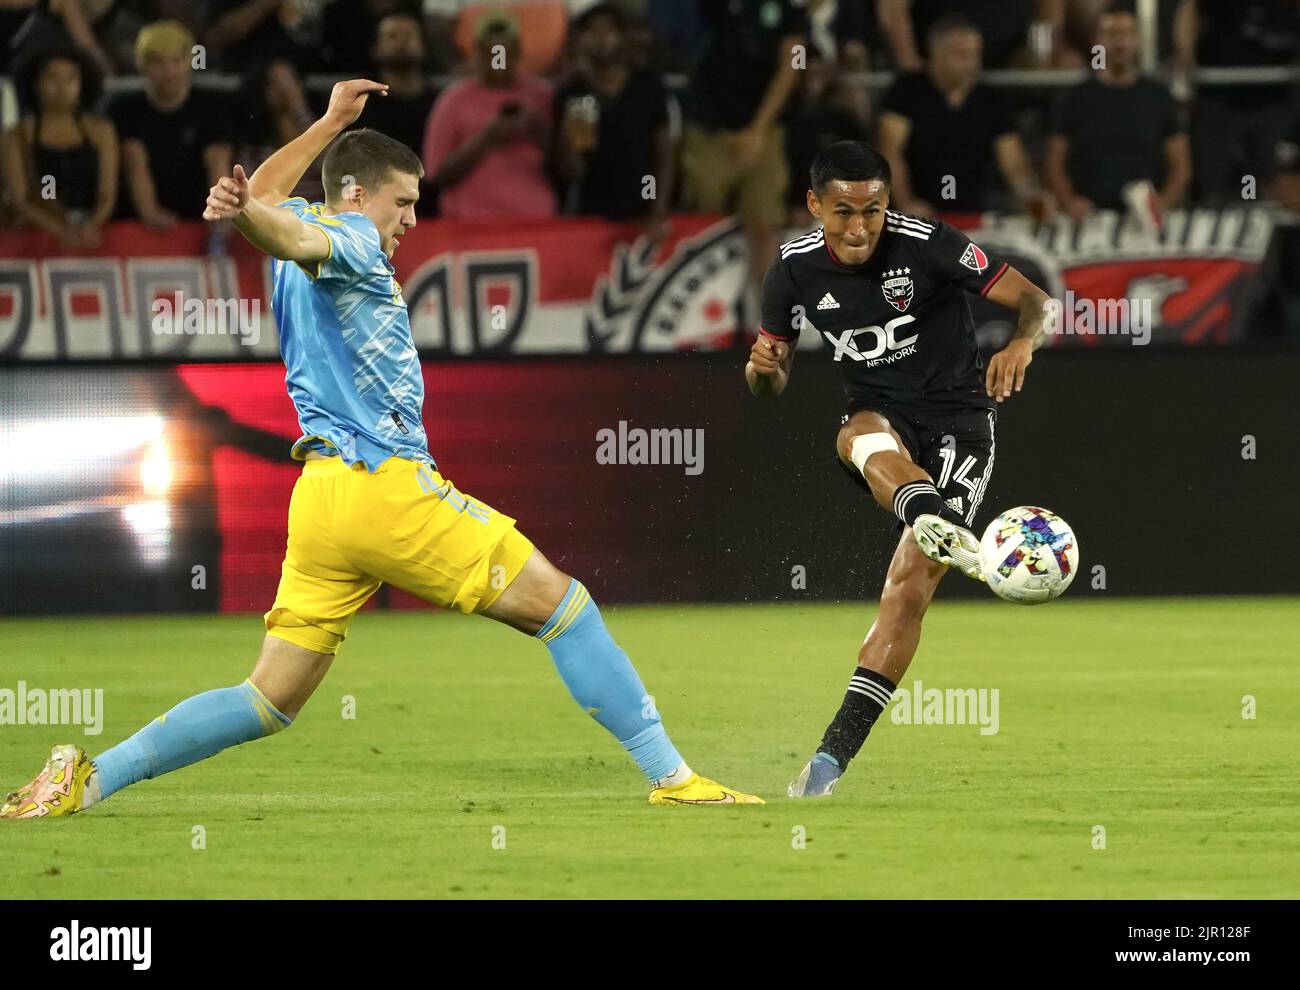 WASHINGTON, DC, USA - 20 AUGUST 2022: D.C. United midfielder Andy Najar (14) shoots past Philadelphia Union forward Mikael Uhre (7) during a MLS match between D.C United and the Philadelphia Union on August 20, 2022, at Audi Field, in Washington, DC. (Photo by Tony Quinn-Alamy Live News) Stock Photo